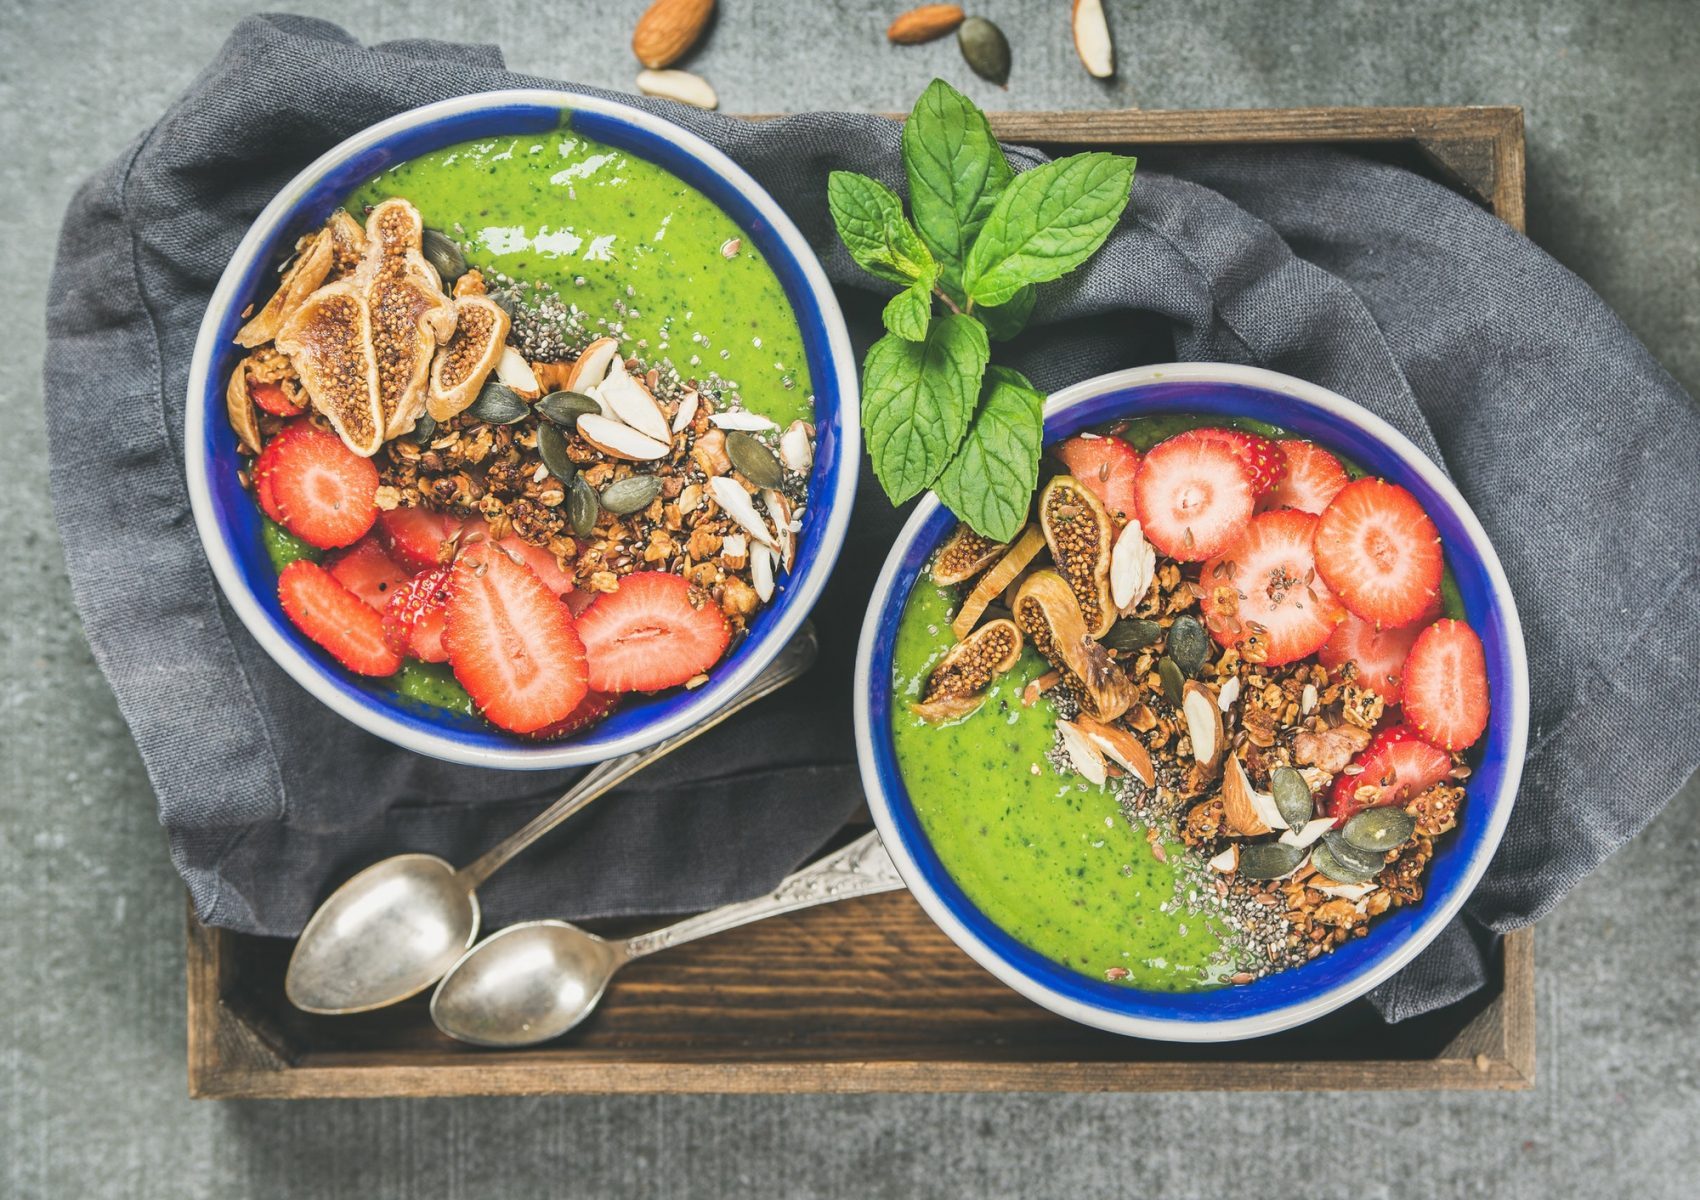 Healthy green smoothie breakfast bowls with granola, fruit, seeds, berries